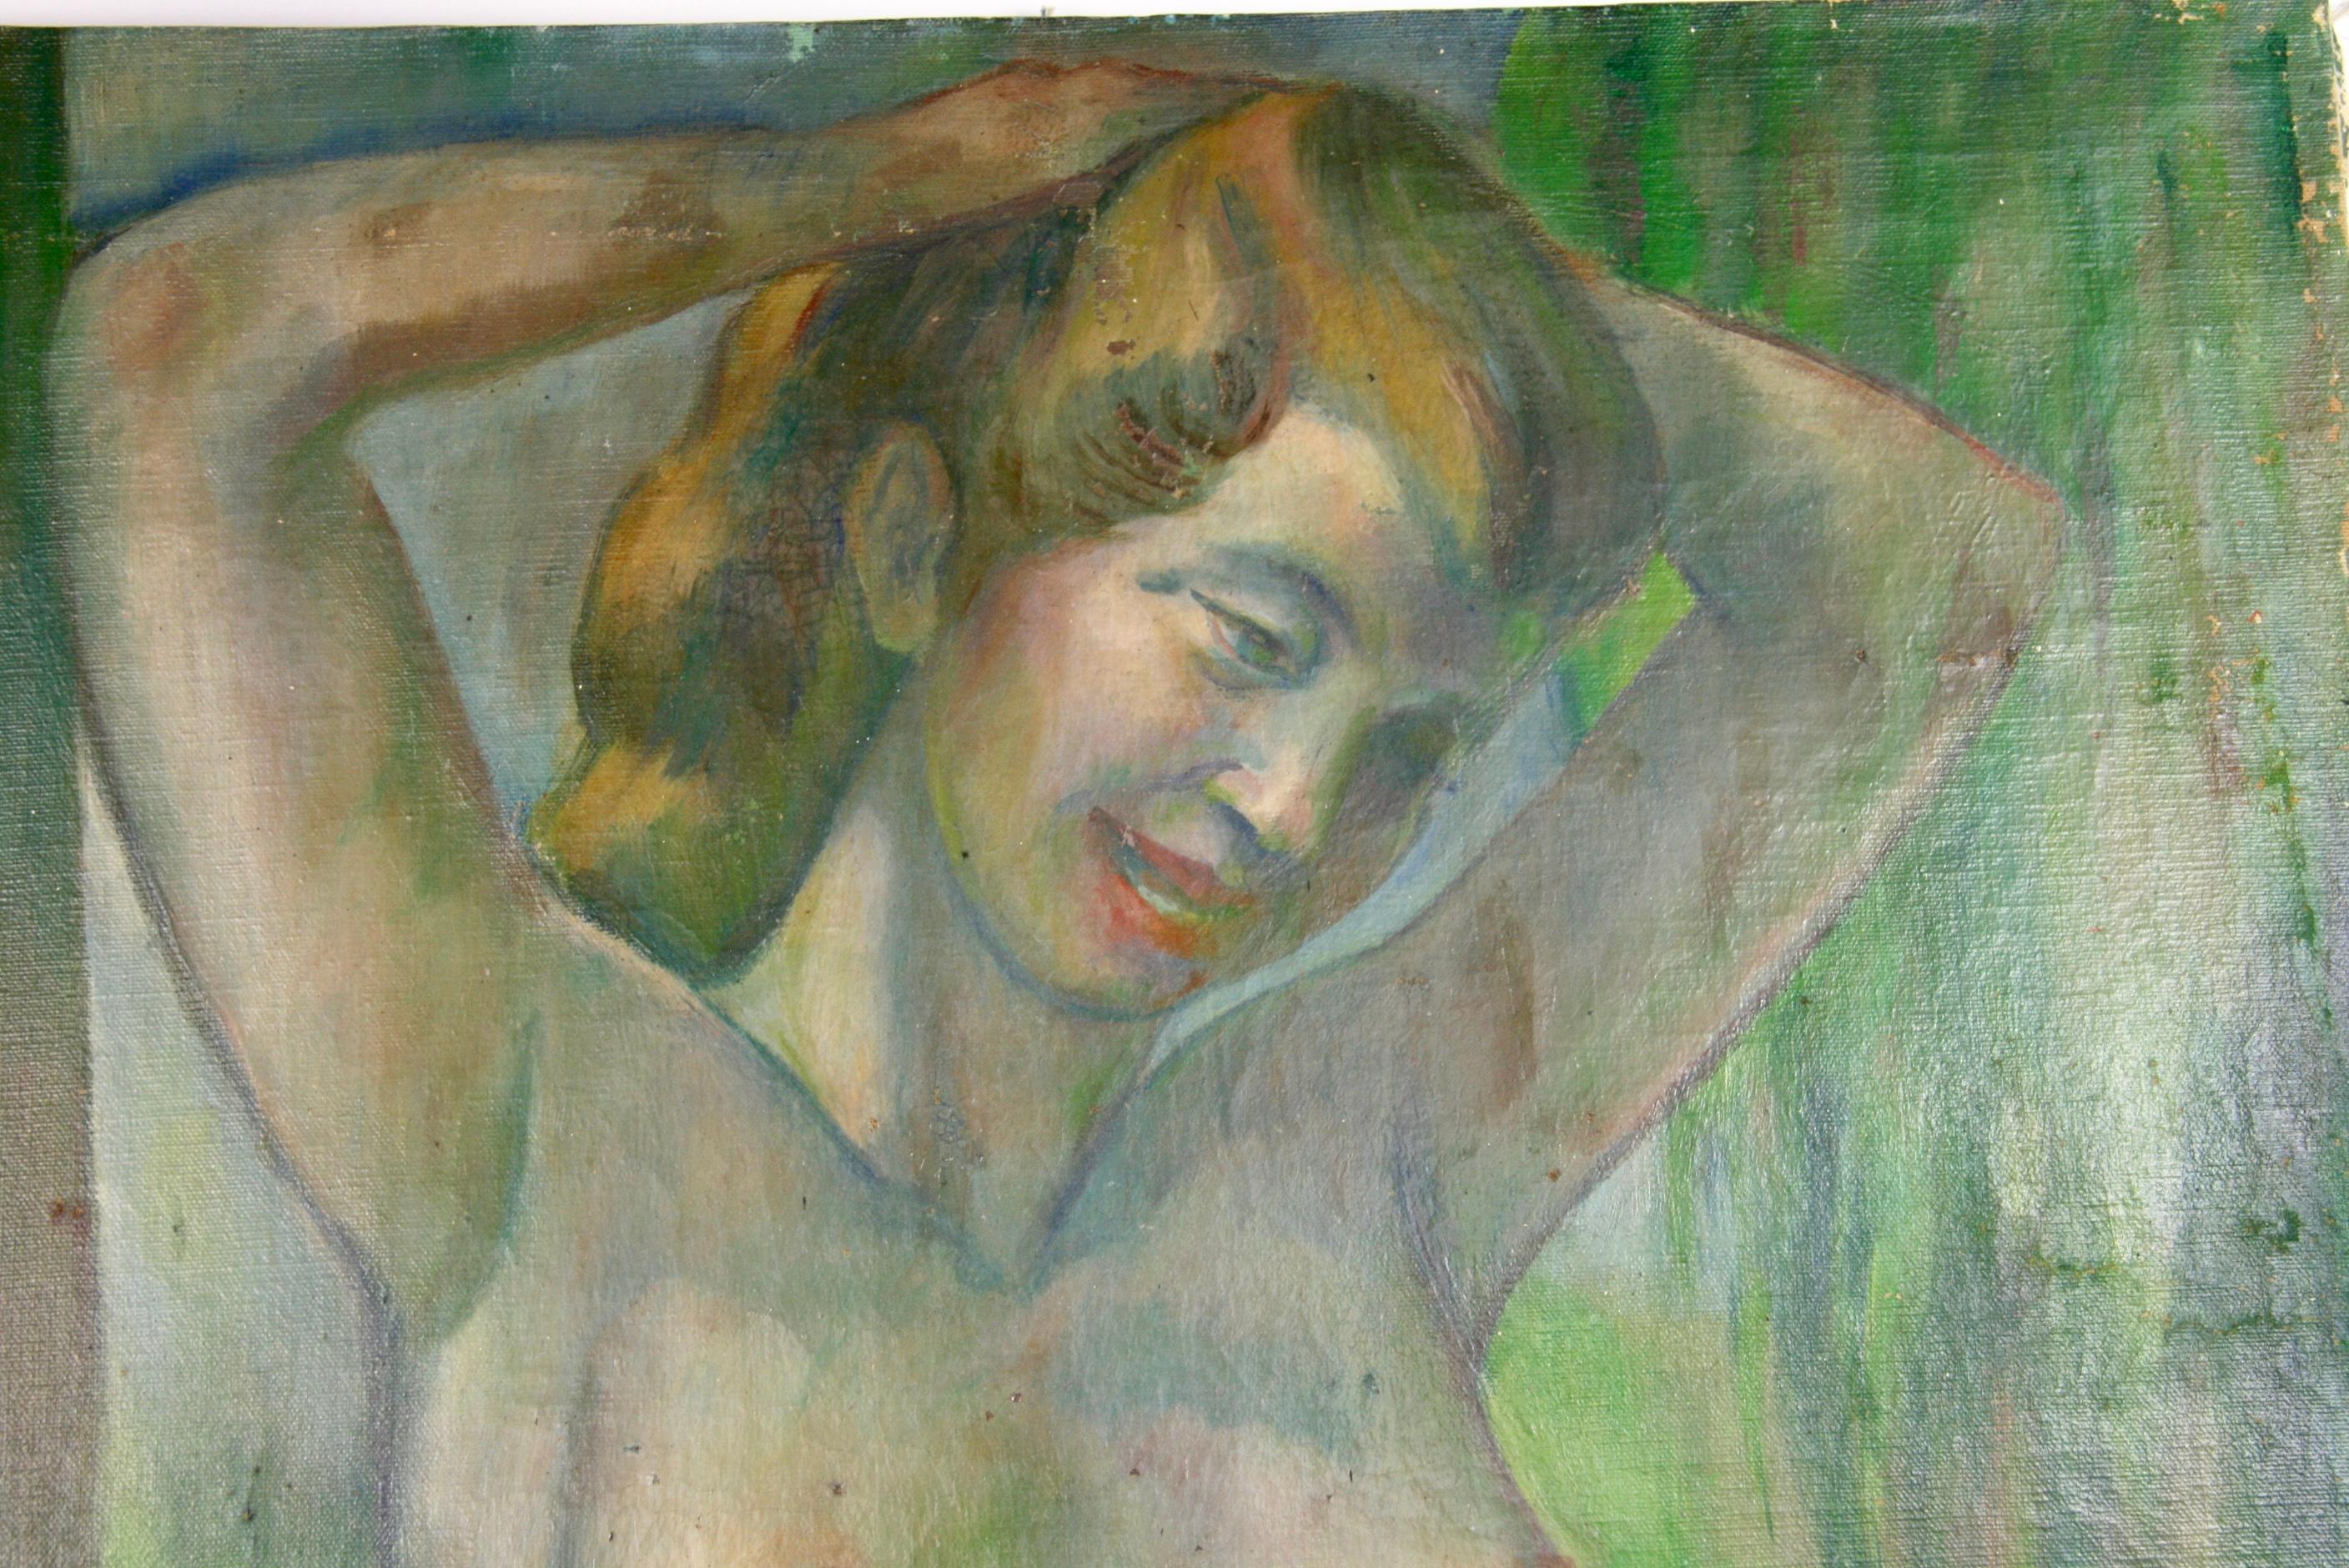 3901 Posing Nude  a 1940's oil on canvas
Signed Pascal La Rocca
Unframed
Some losses to paint.